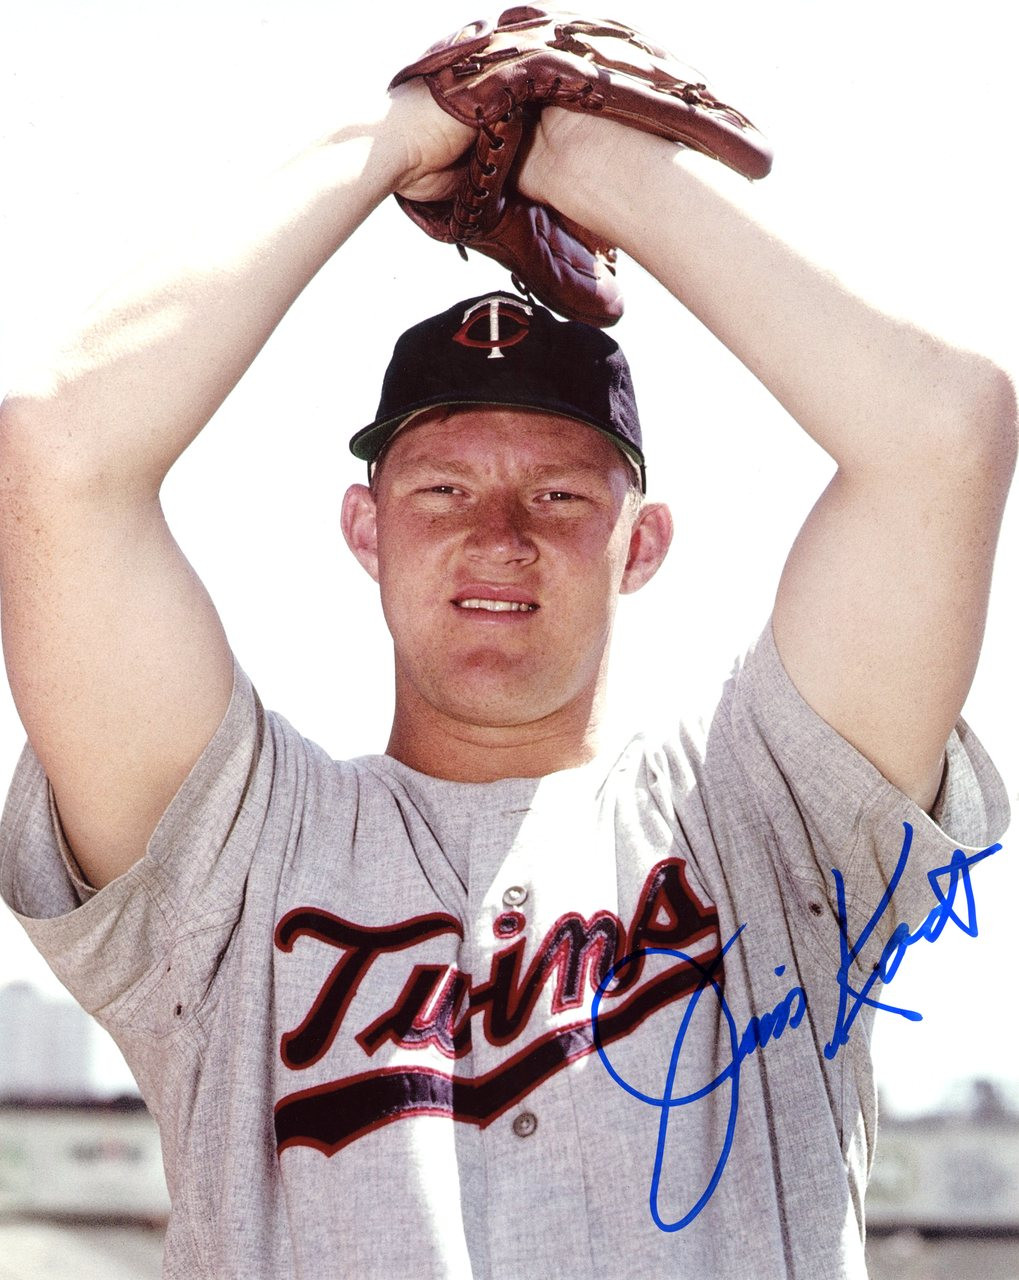 Official Minnesota Twins Photos, Twins Autographed Pictures, Photographs